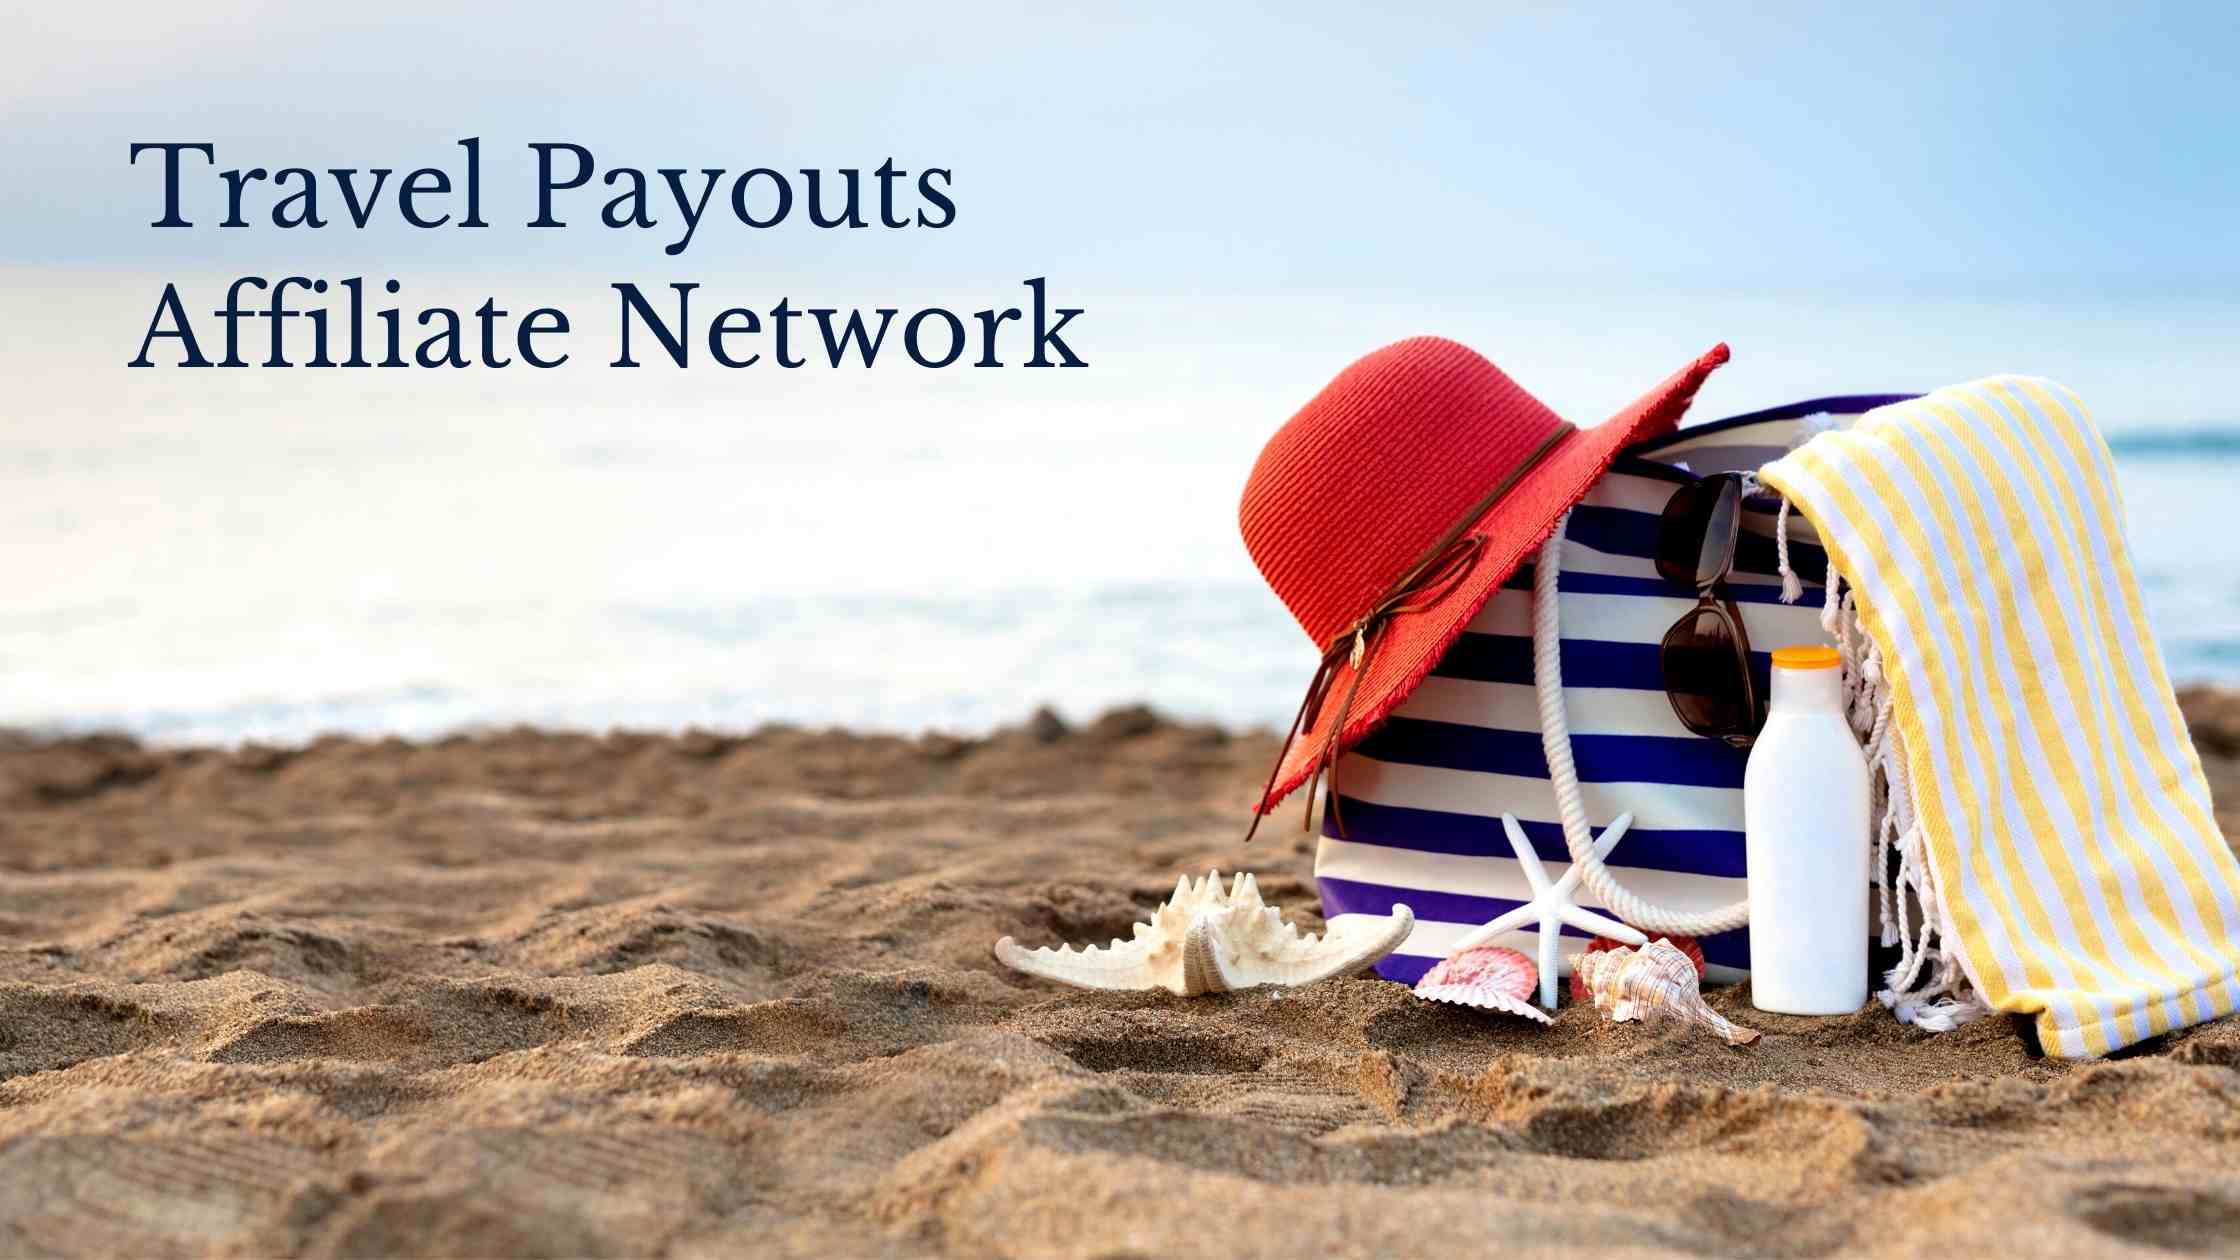 Travelpayouts is an affiliate network that specializes in affiliate programs related to travel.